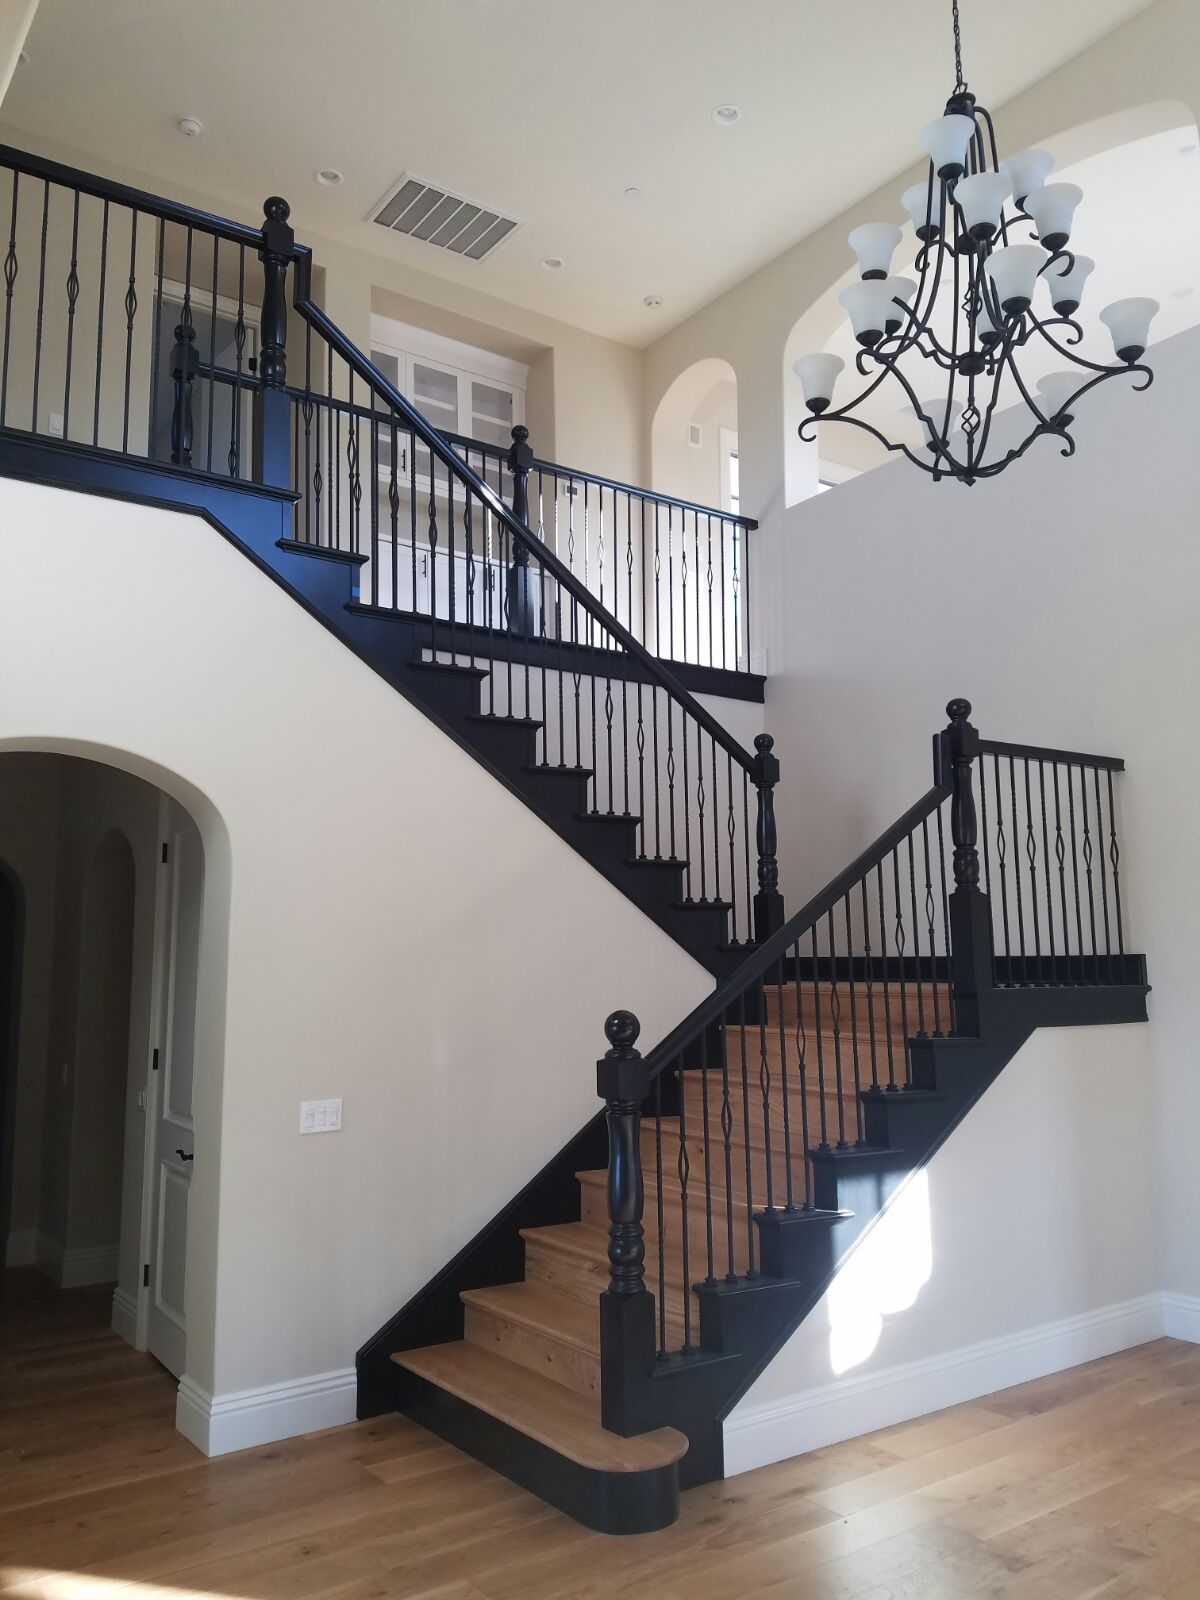 CertaPro Painters the Interior house painting experts in Black Mountain Ranch, CA